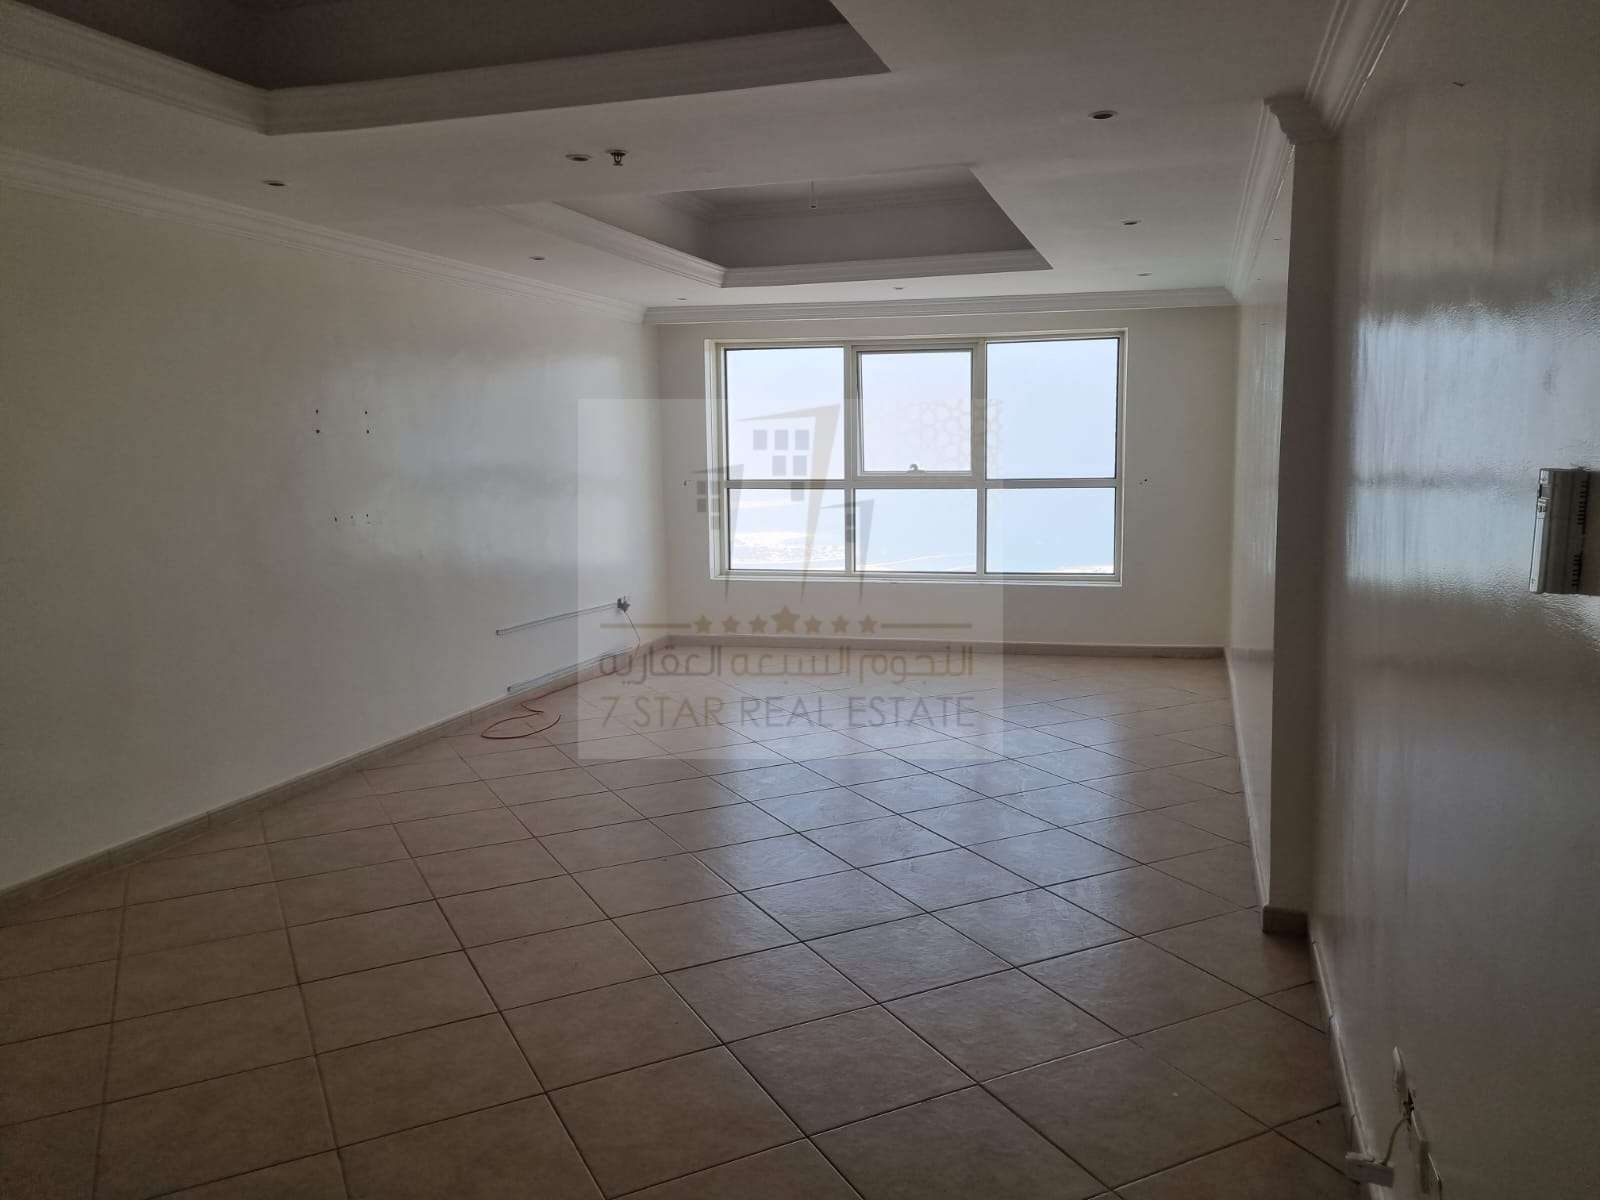 3 BR  Apartment For Sale in Al Rund Tower